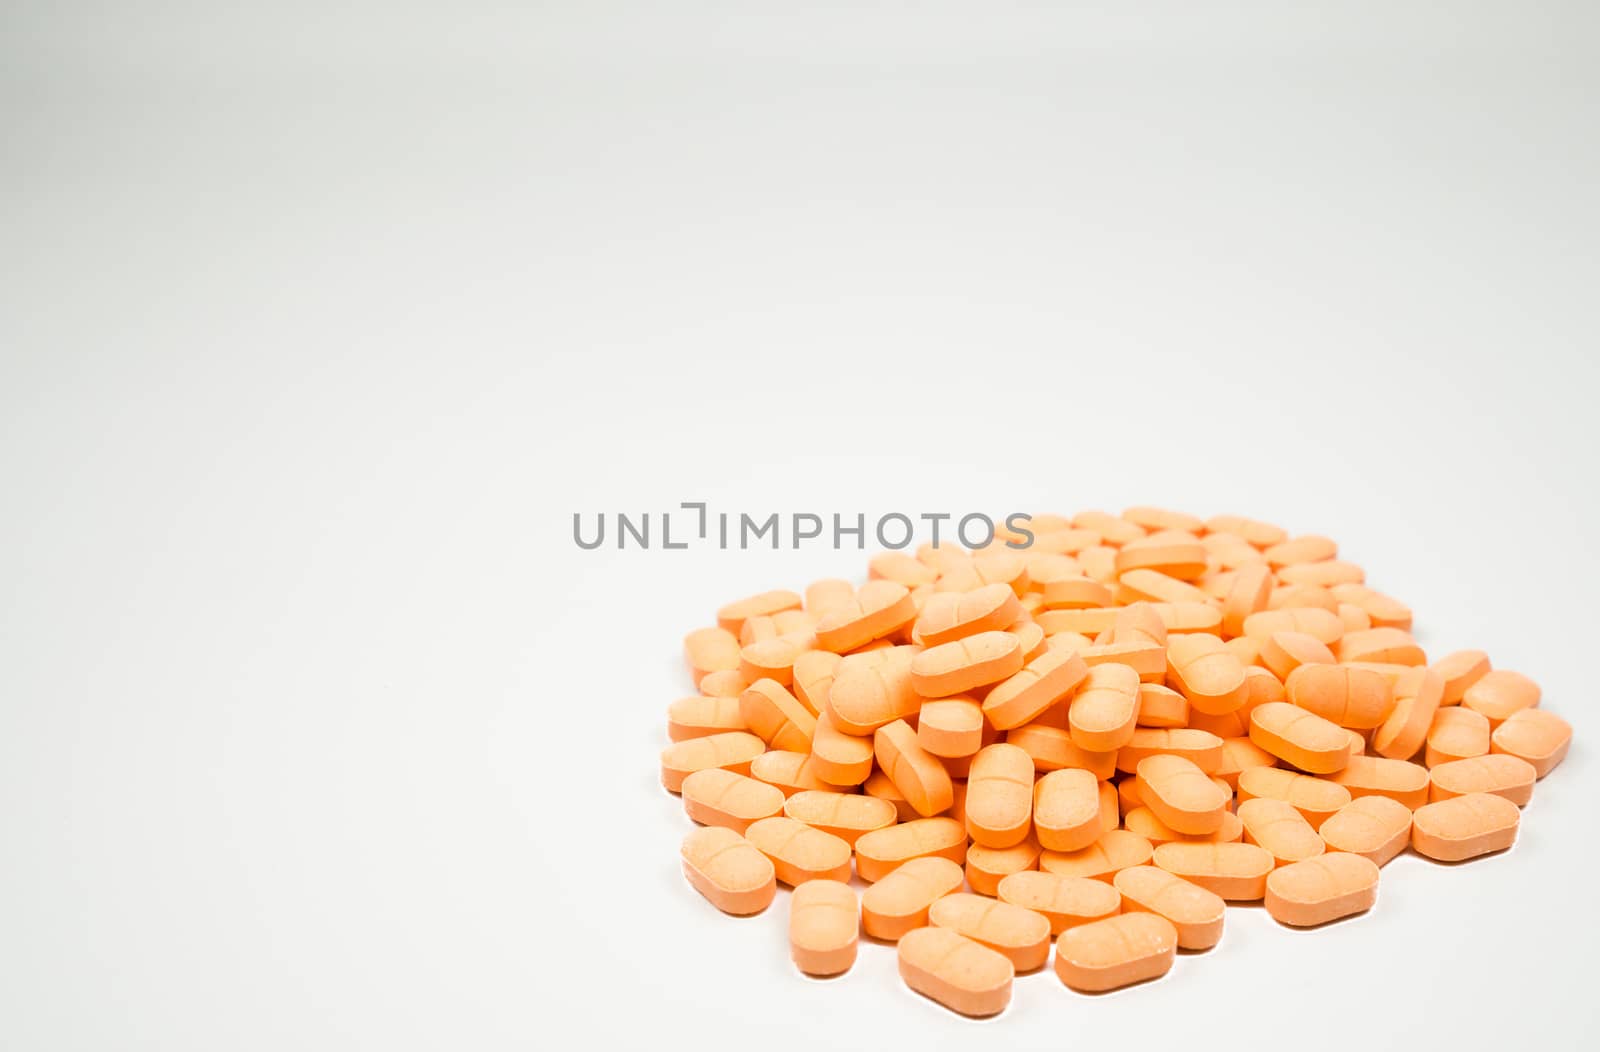 Pile of muscle relaxant, pain relief tablet pills isolated on white background with copy space for text. Pharmaceutical industry. Pharmacy background. Global healthcare concept. by Fahroni